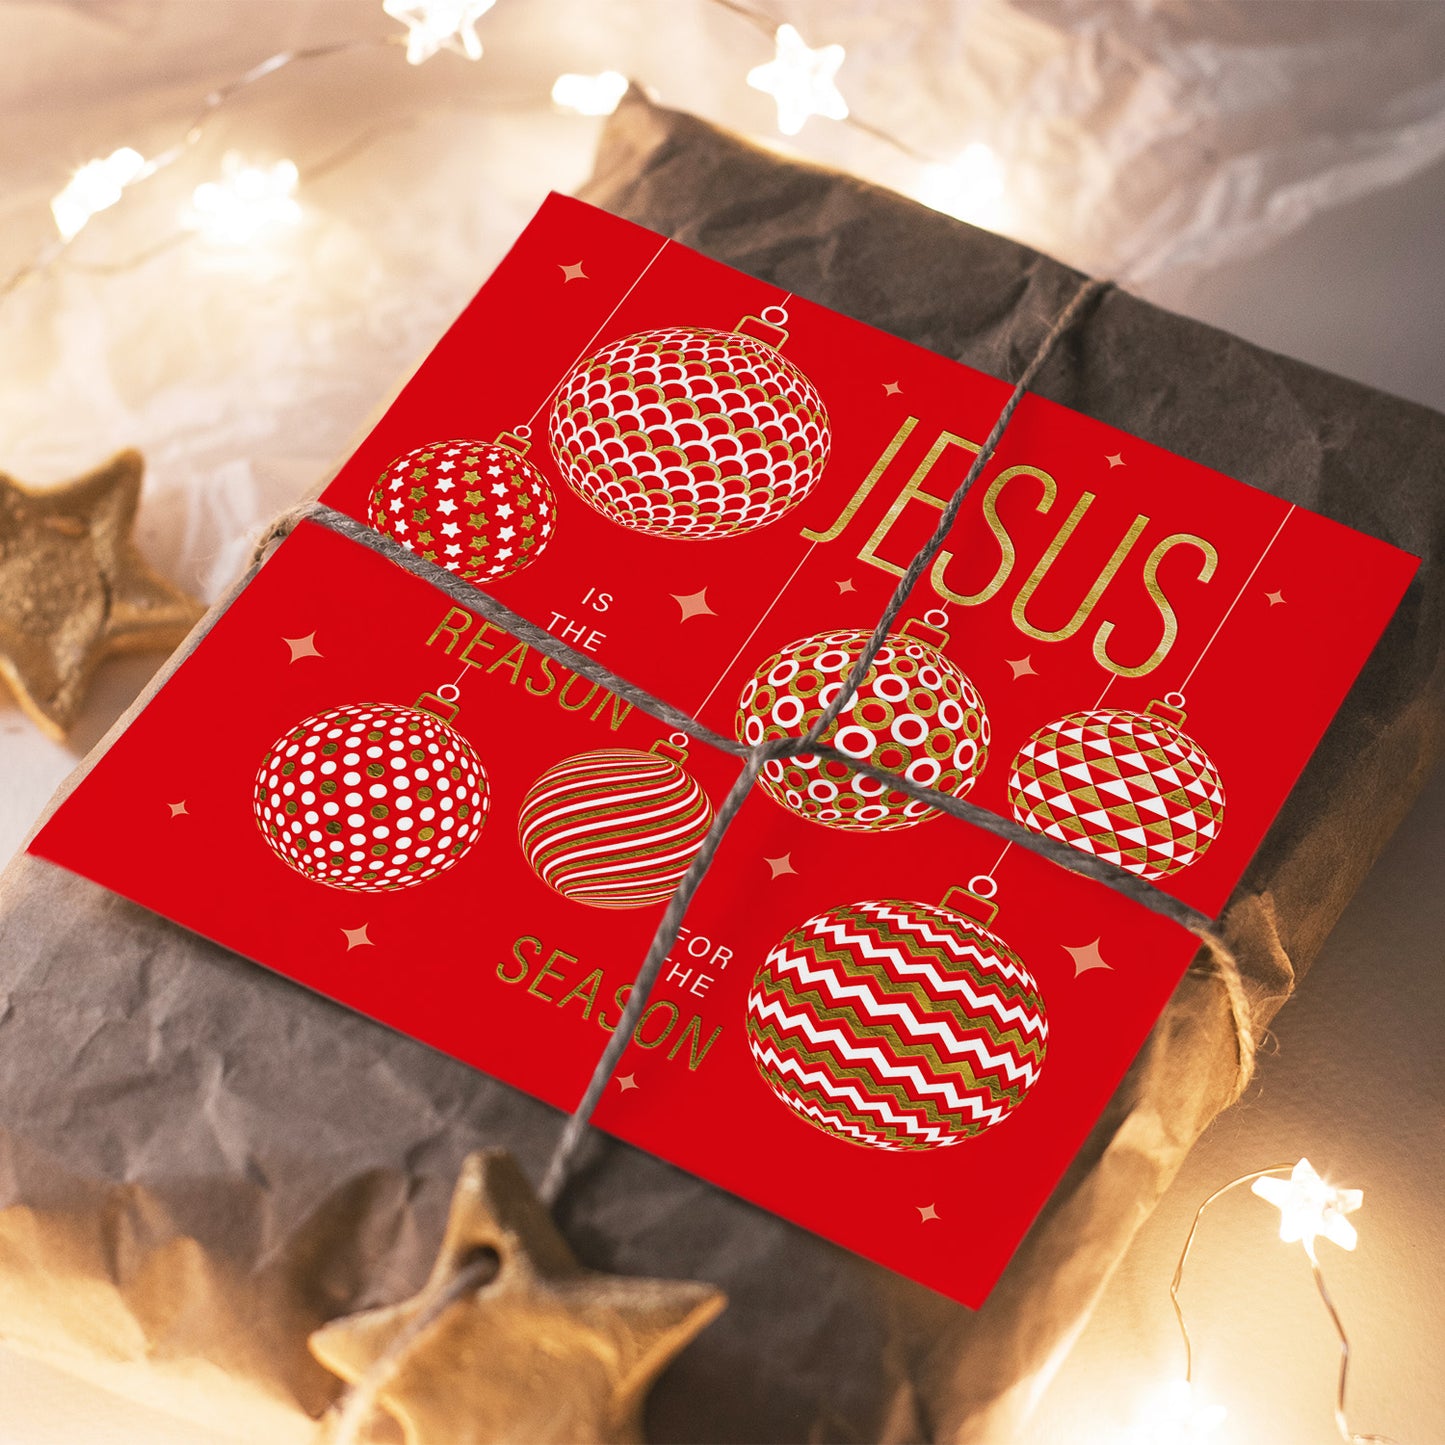 Compassion Christmas Card: Jesus/Reason (pack of 10) - The Christian Gift Company